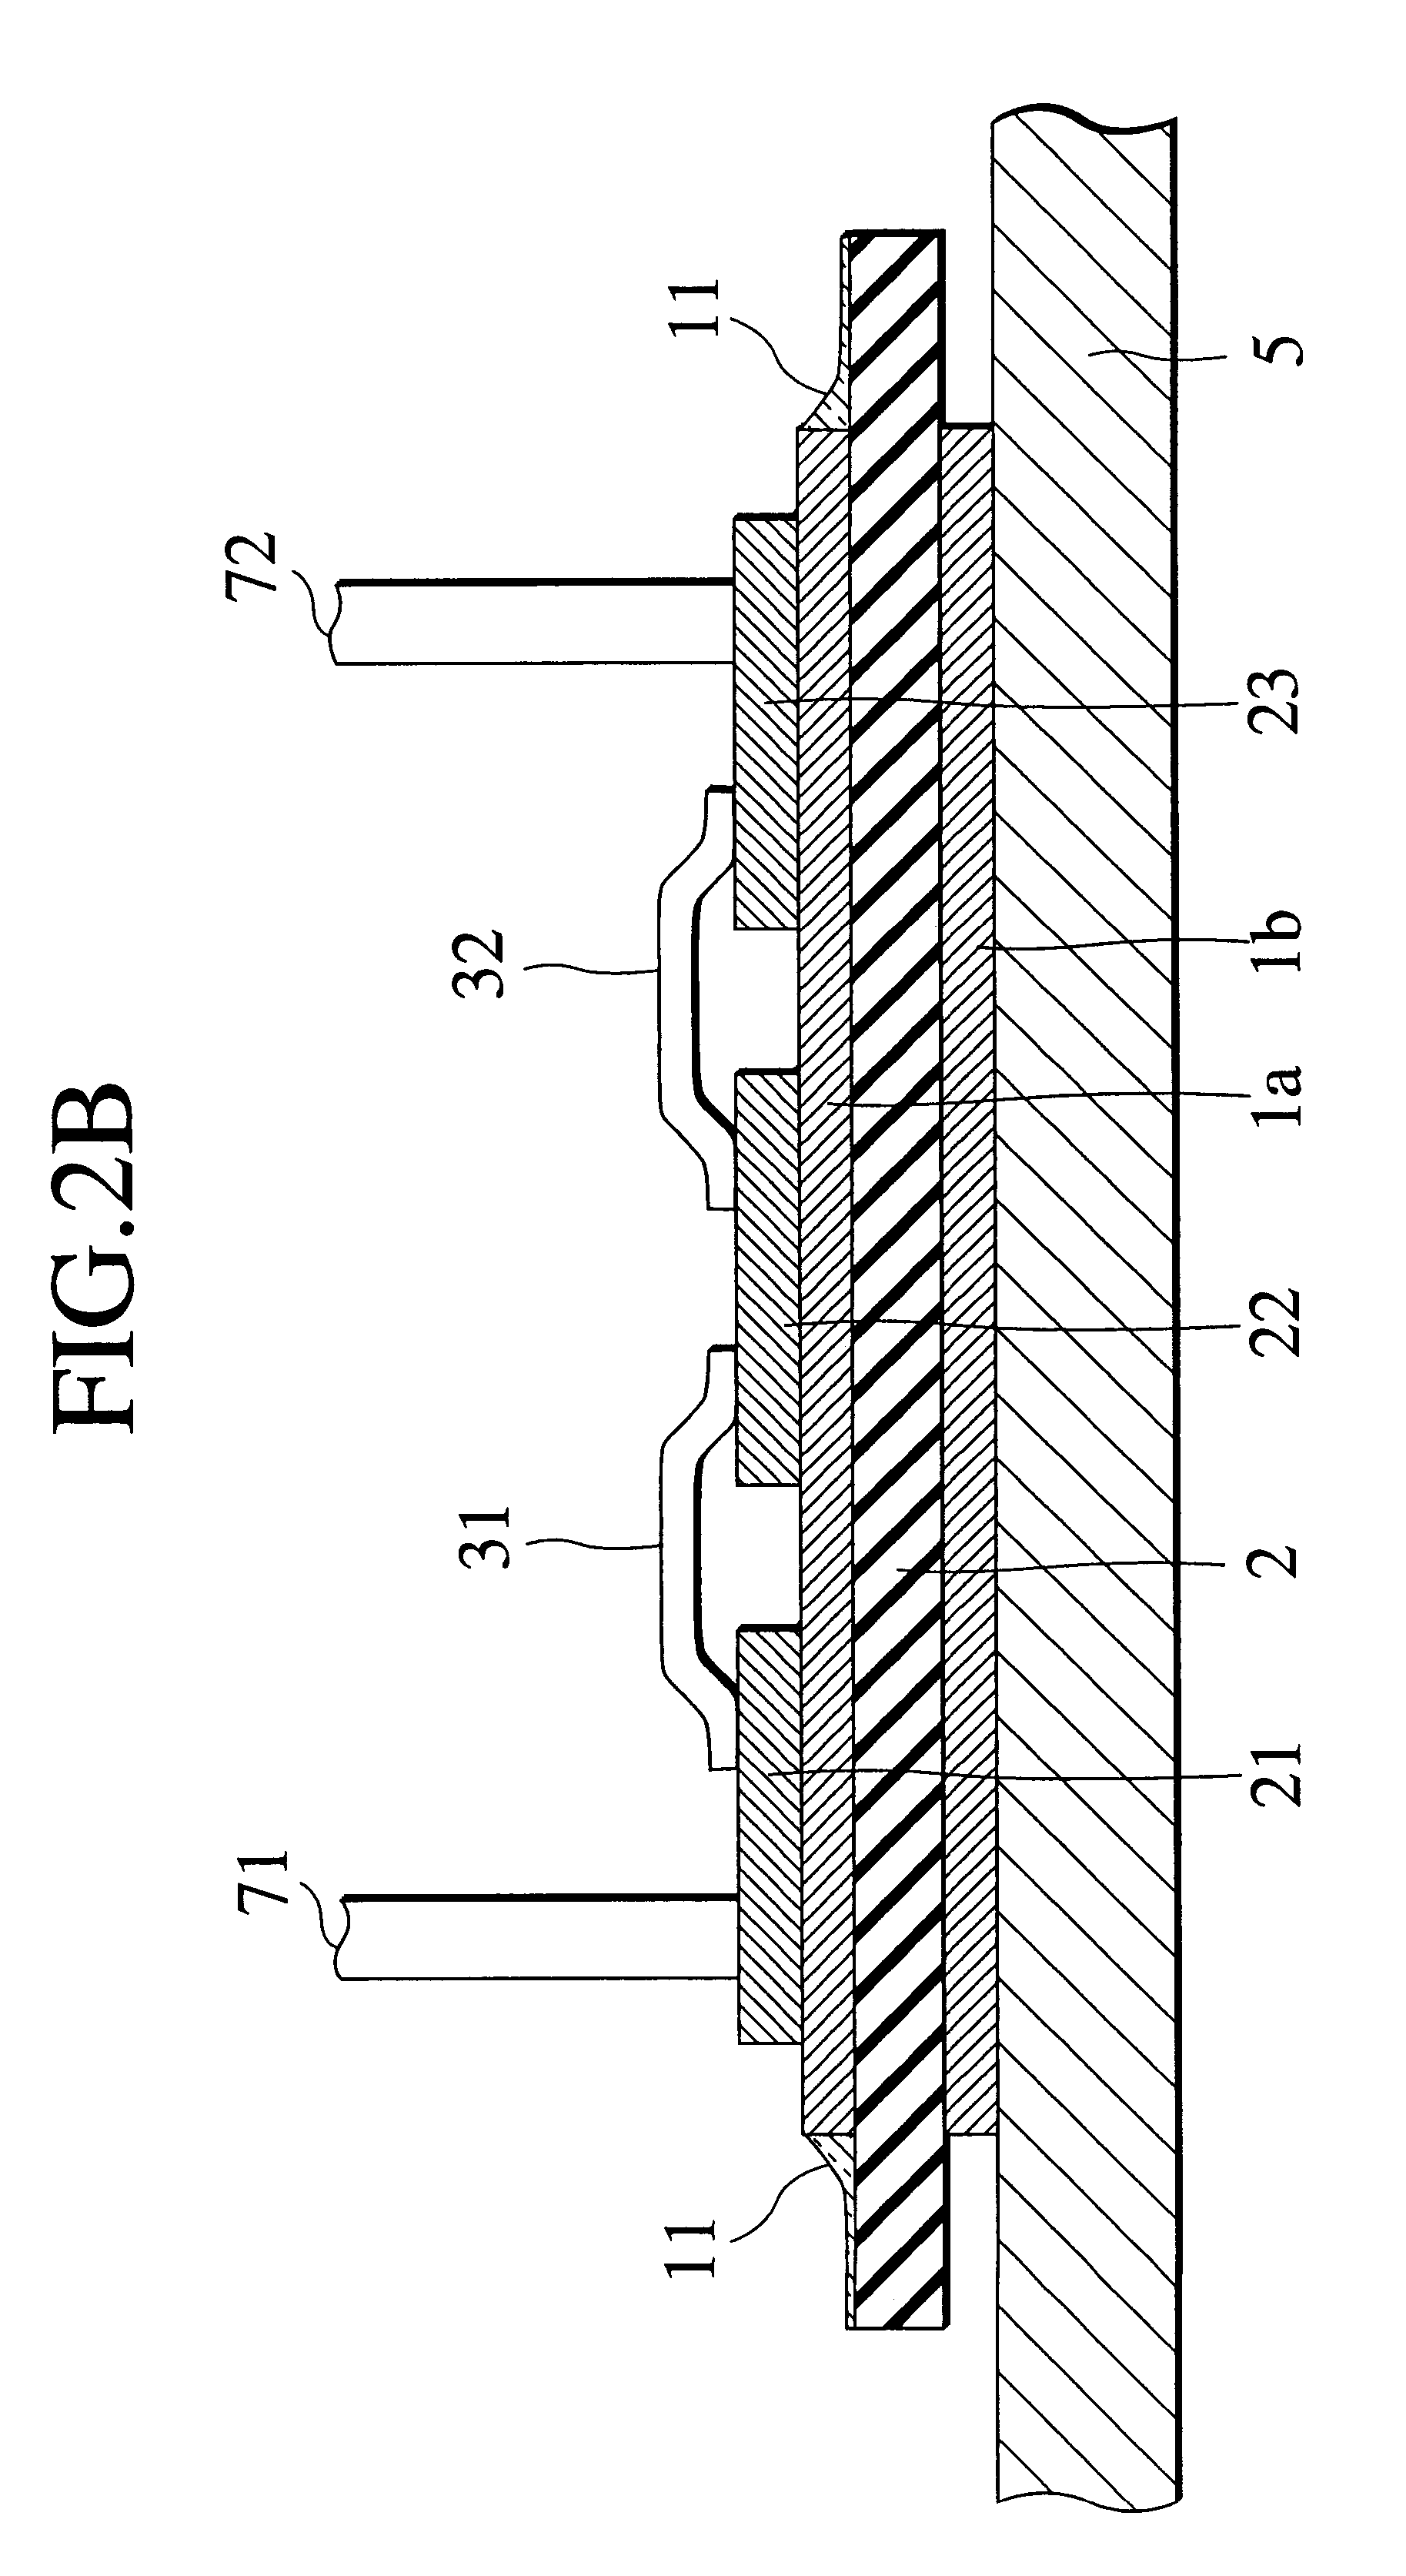 Package for semiconductor power device and method for assembling the same